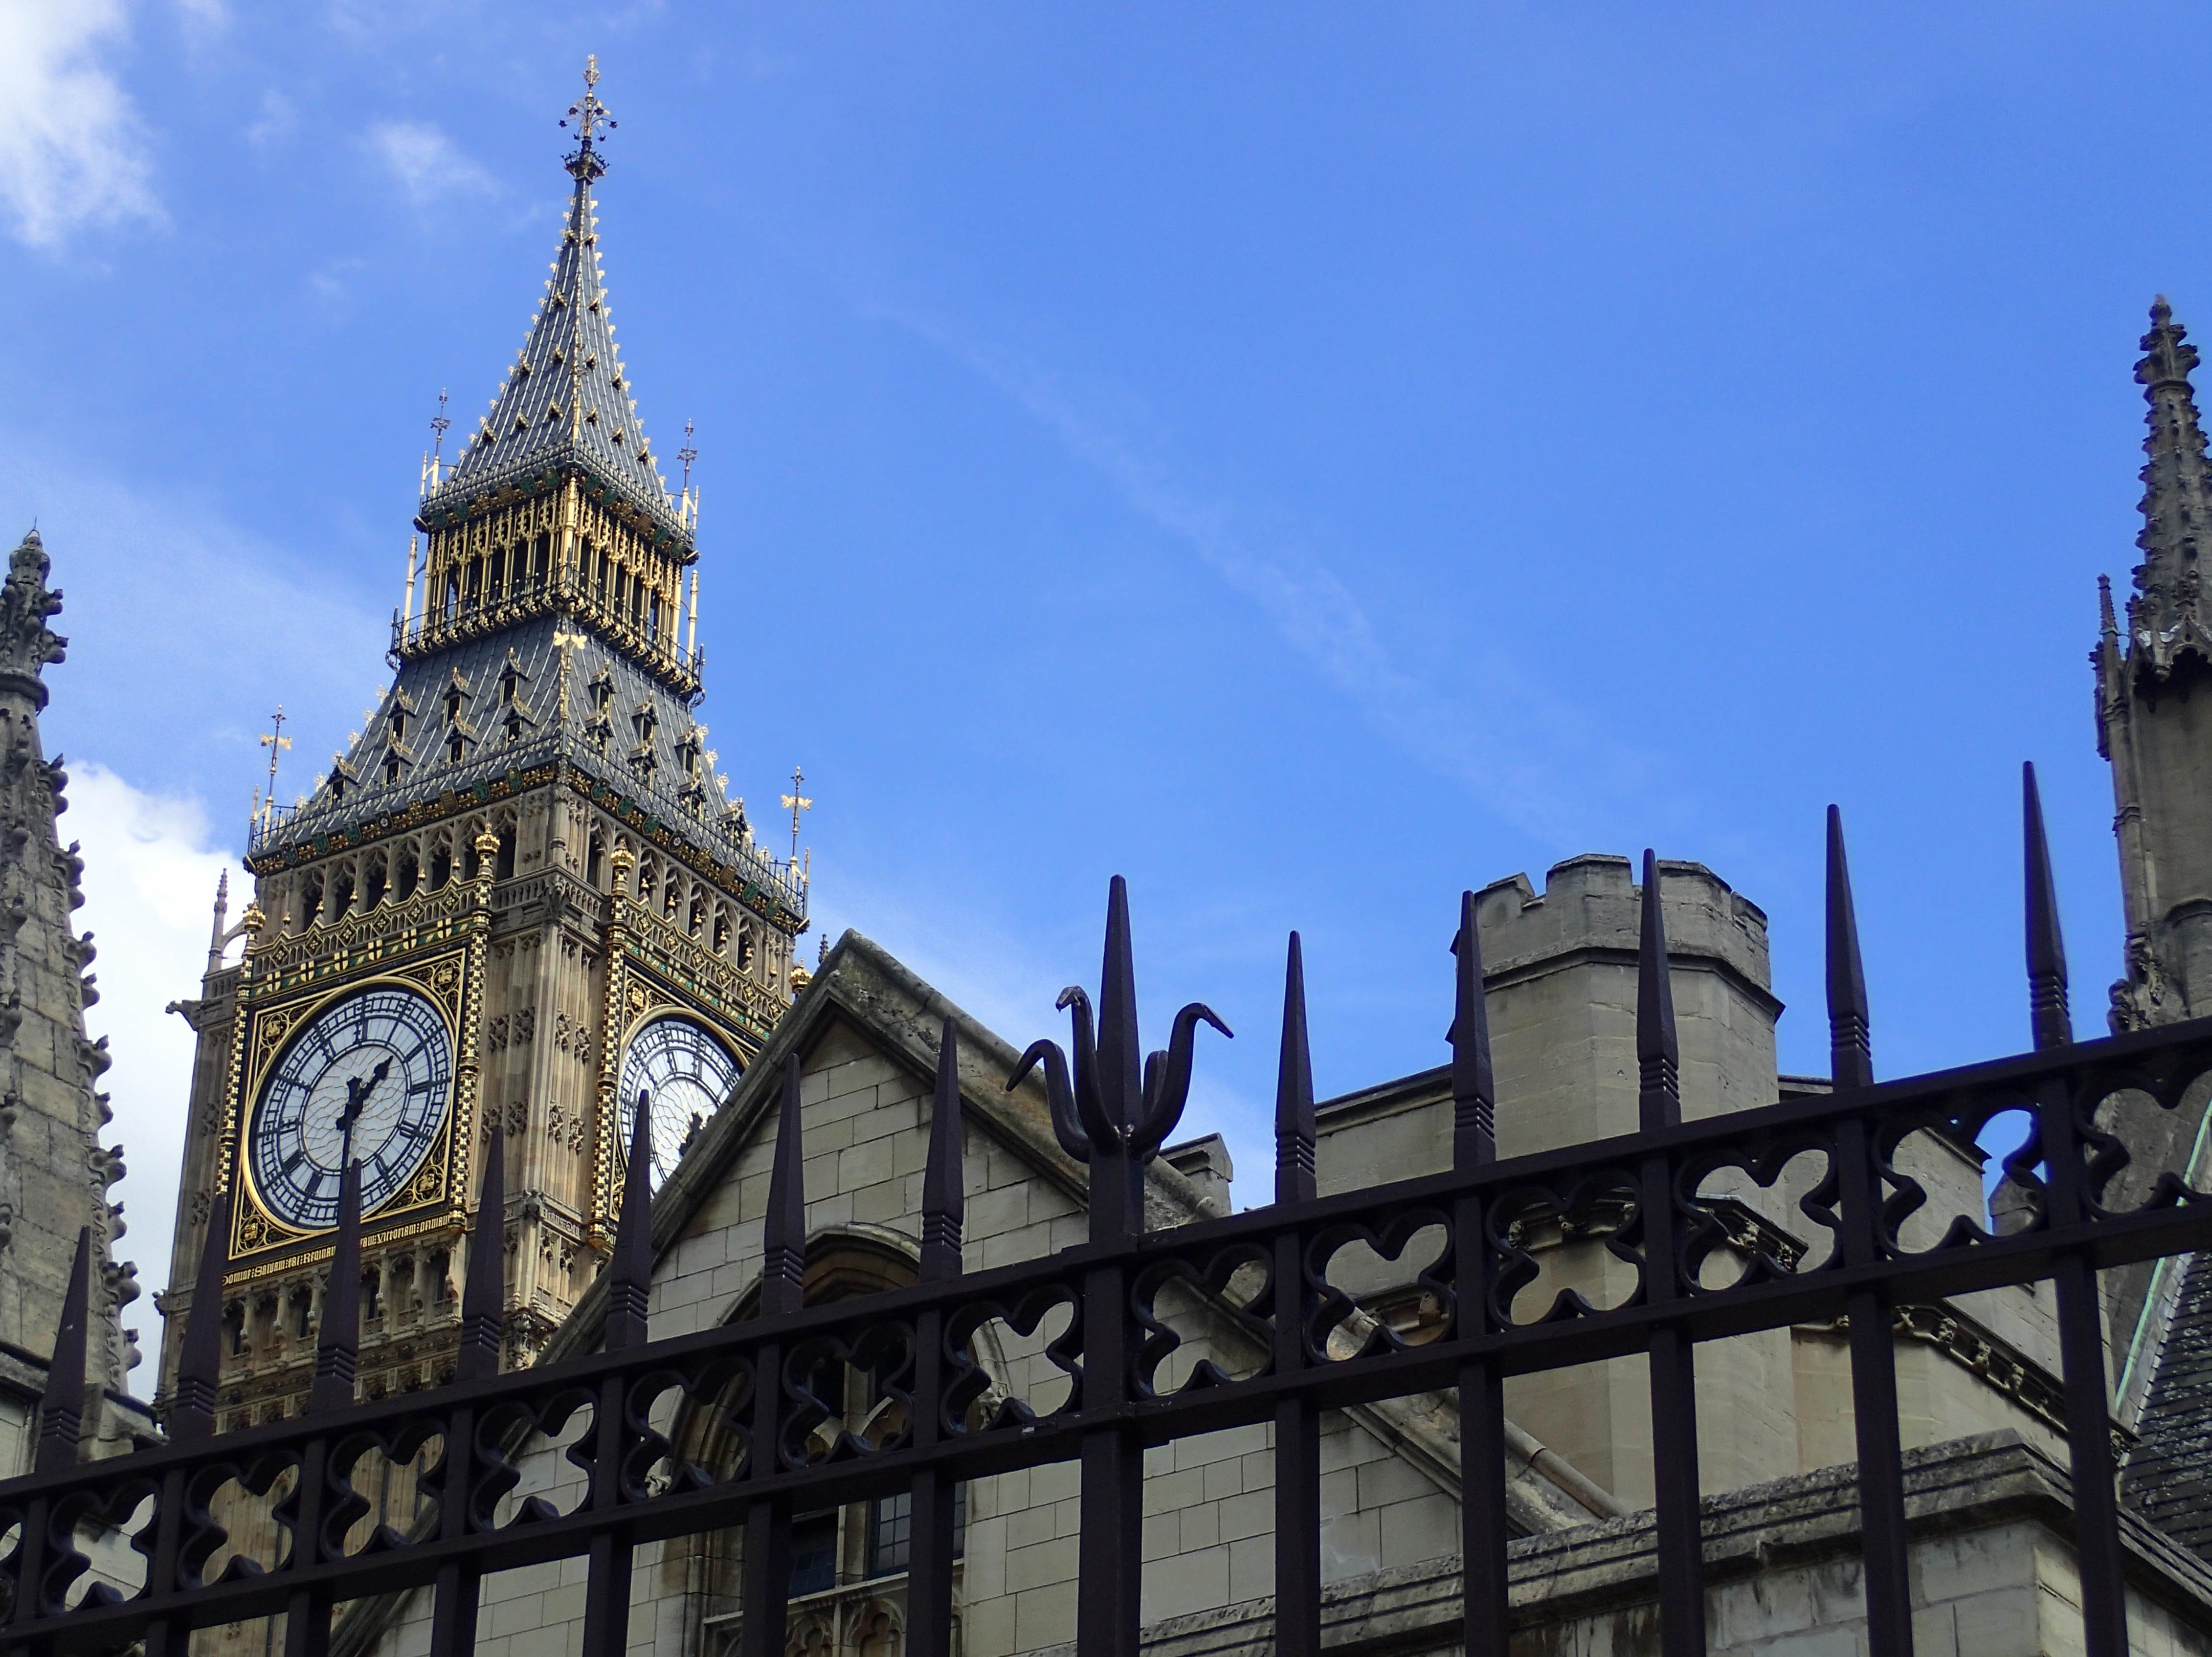 A man was detained after trying to drive through parliament’s gates, police say